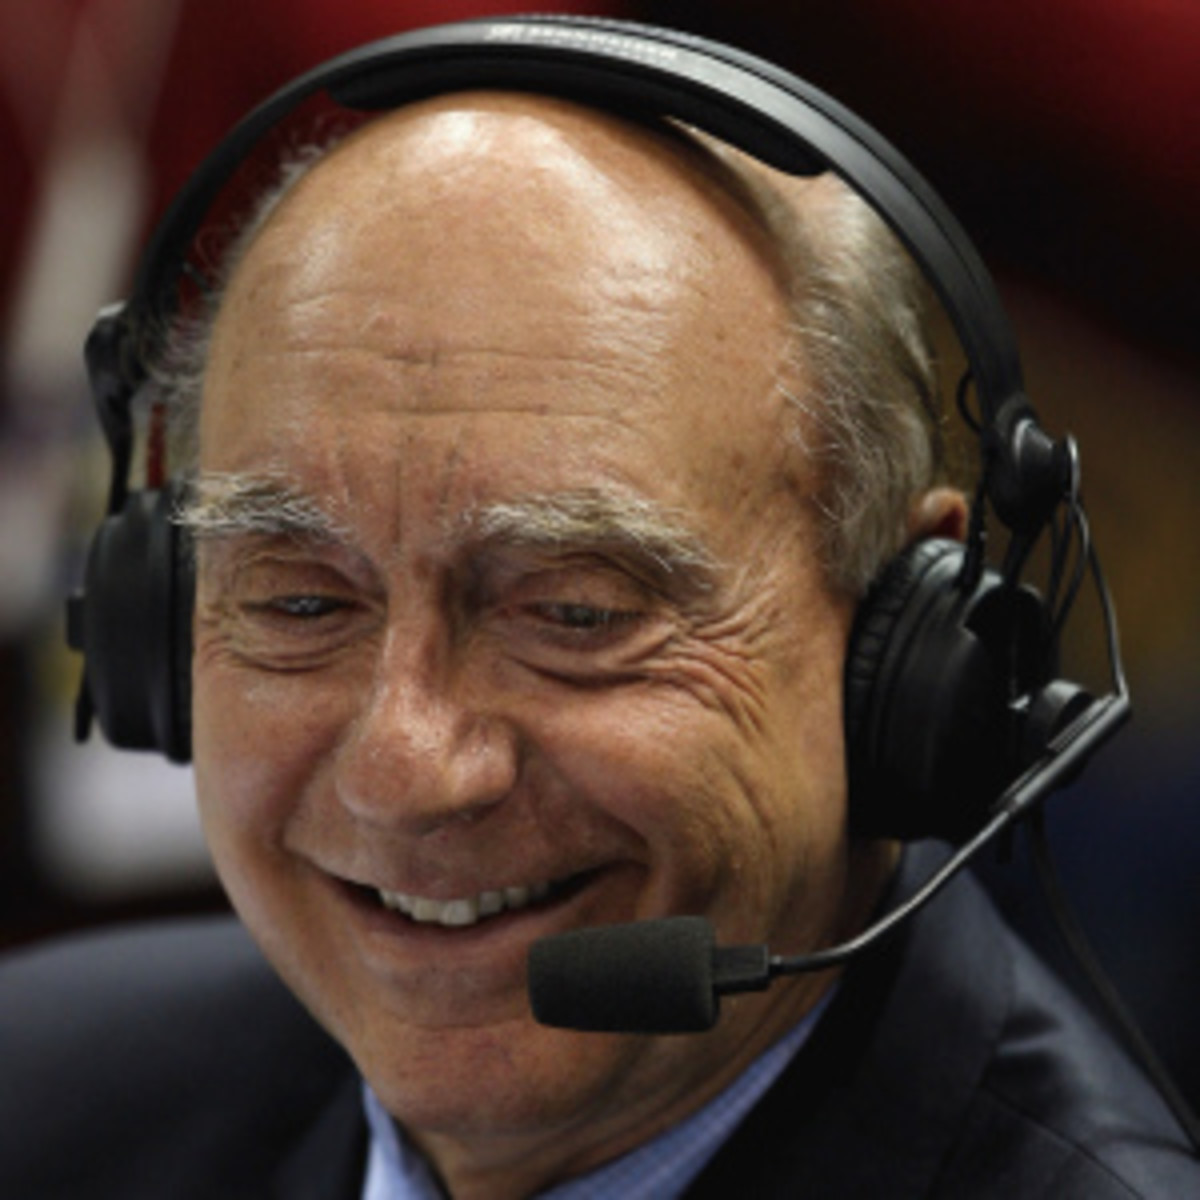 Dick Vitale will call the Final Four for the first time this year. (Jonathan Daniel/Getty Images)